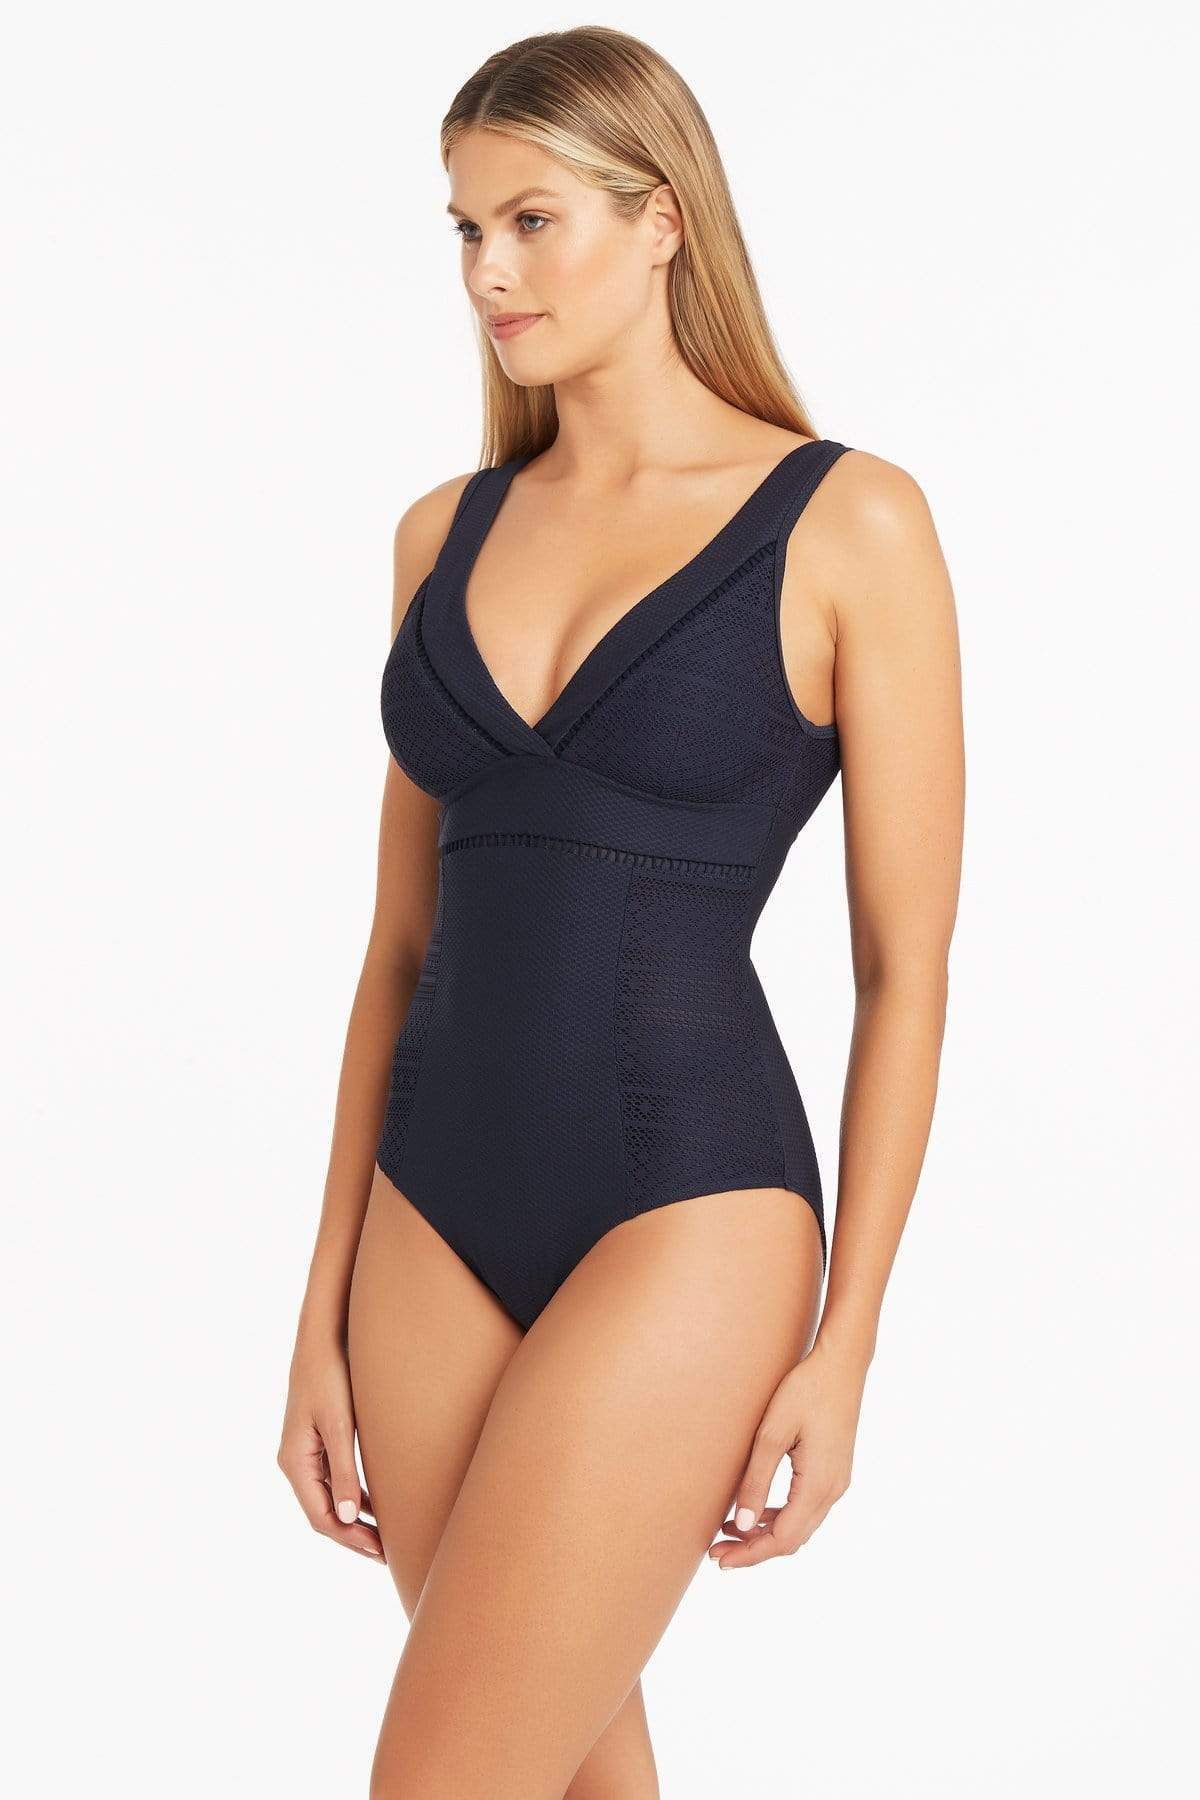 SEA LEVEL - AMAZING LACE CROSS FRONT ONE PIECE